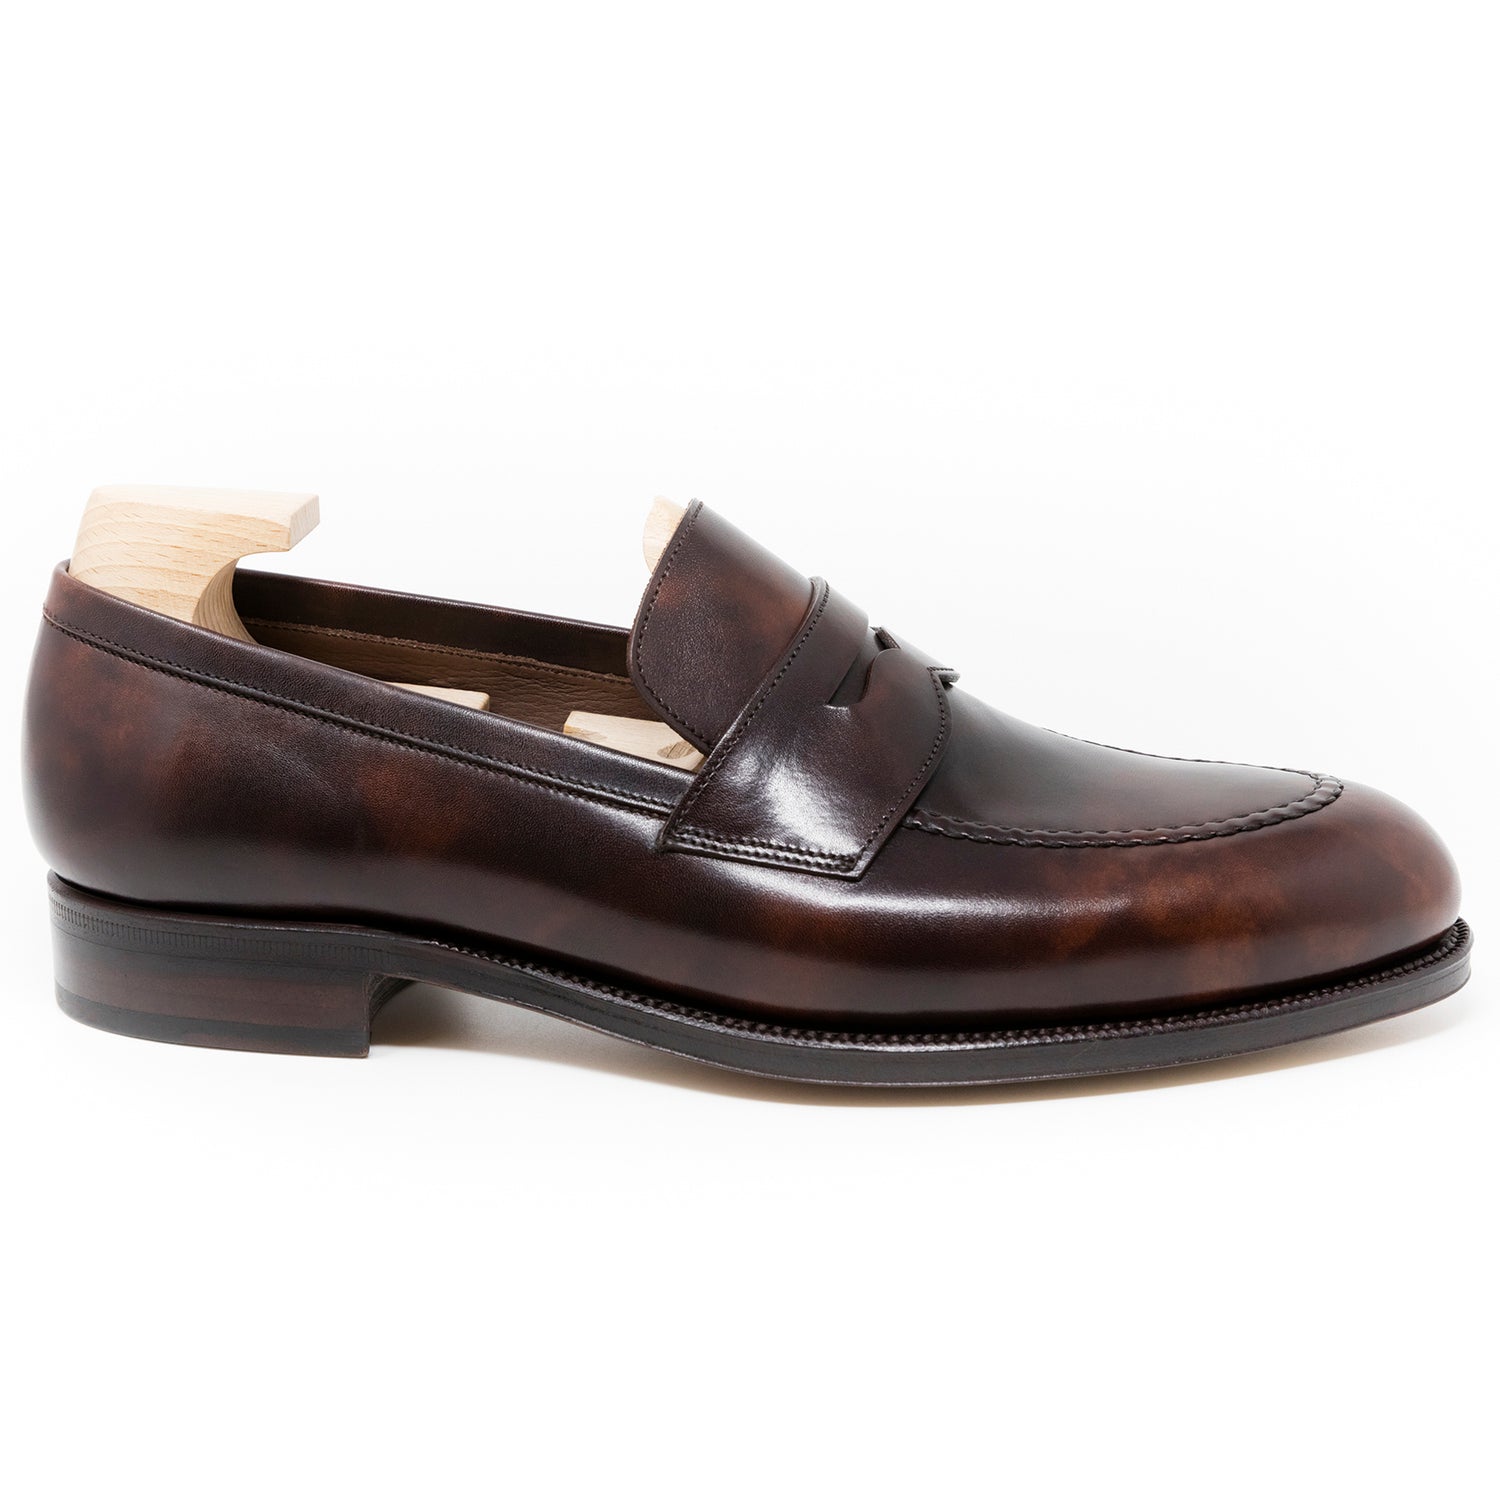 TLB Mallorca leather shoes 545 / JONES / MUSEUM CALF BROWN